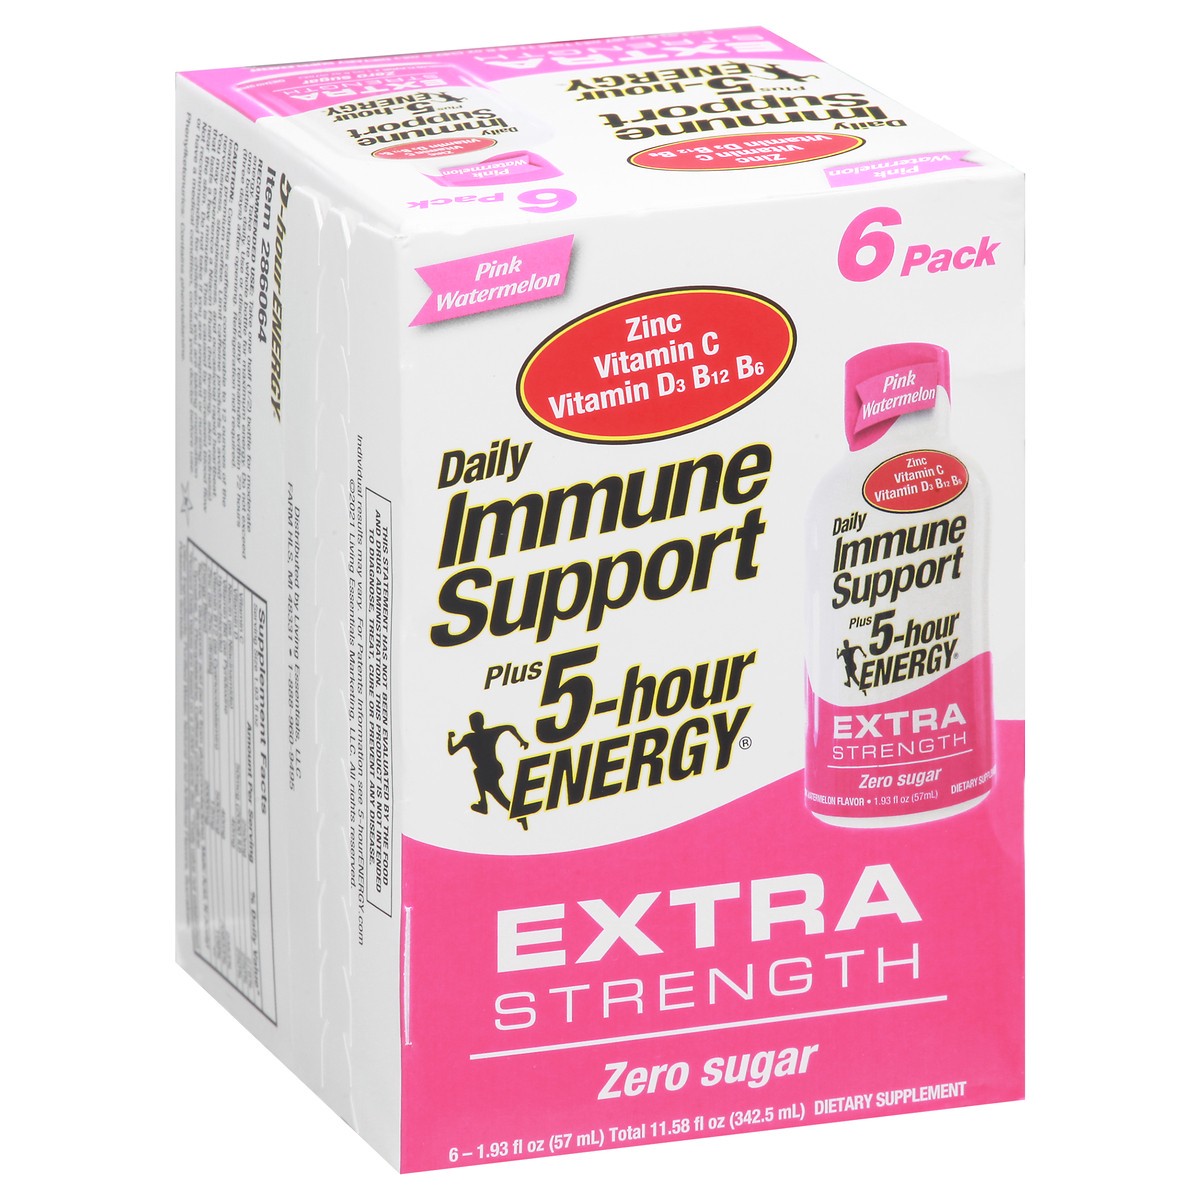 slide 8 of 14, 5-Hour Energy 6 Pack Extra Strength Pink Watermelon Daily Immune Support 6 1.93 fl oz 6 ea Box, 1.93 oz